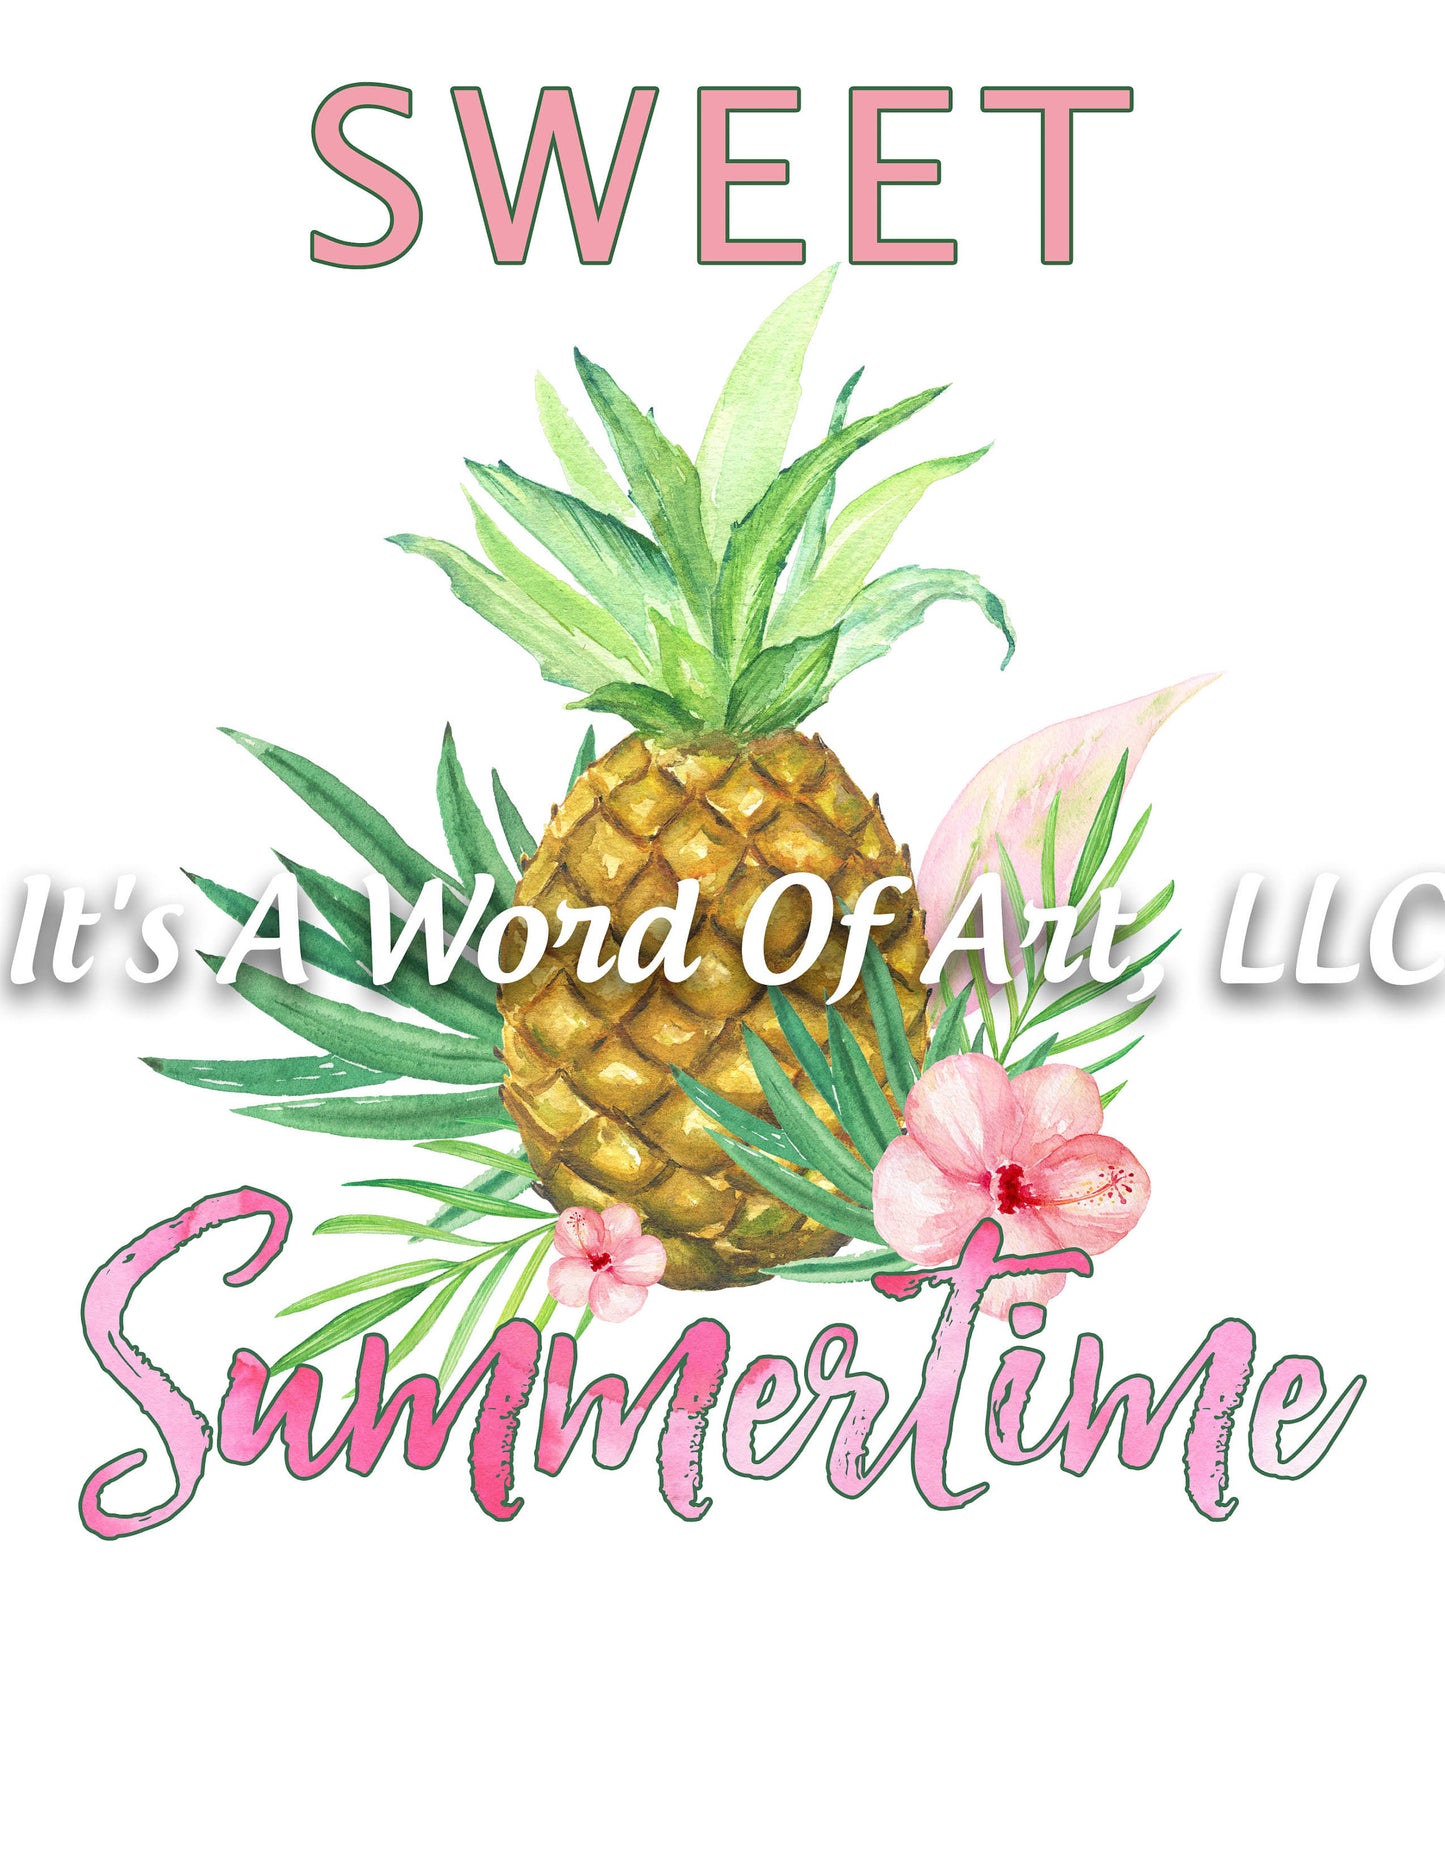 Summer 02 - Sweet Summertime Pineapple Flowers - Sublimation Transfer Set/Ready To Press Sublimation Transfer/Sublimation Transfer